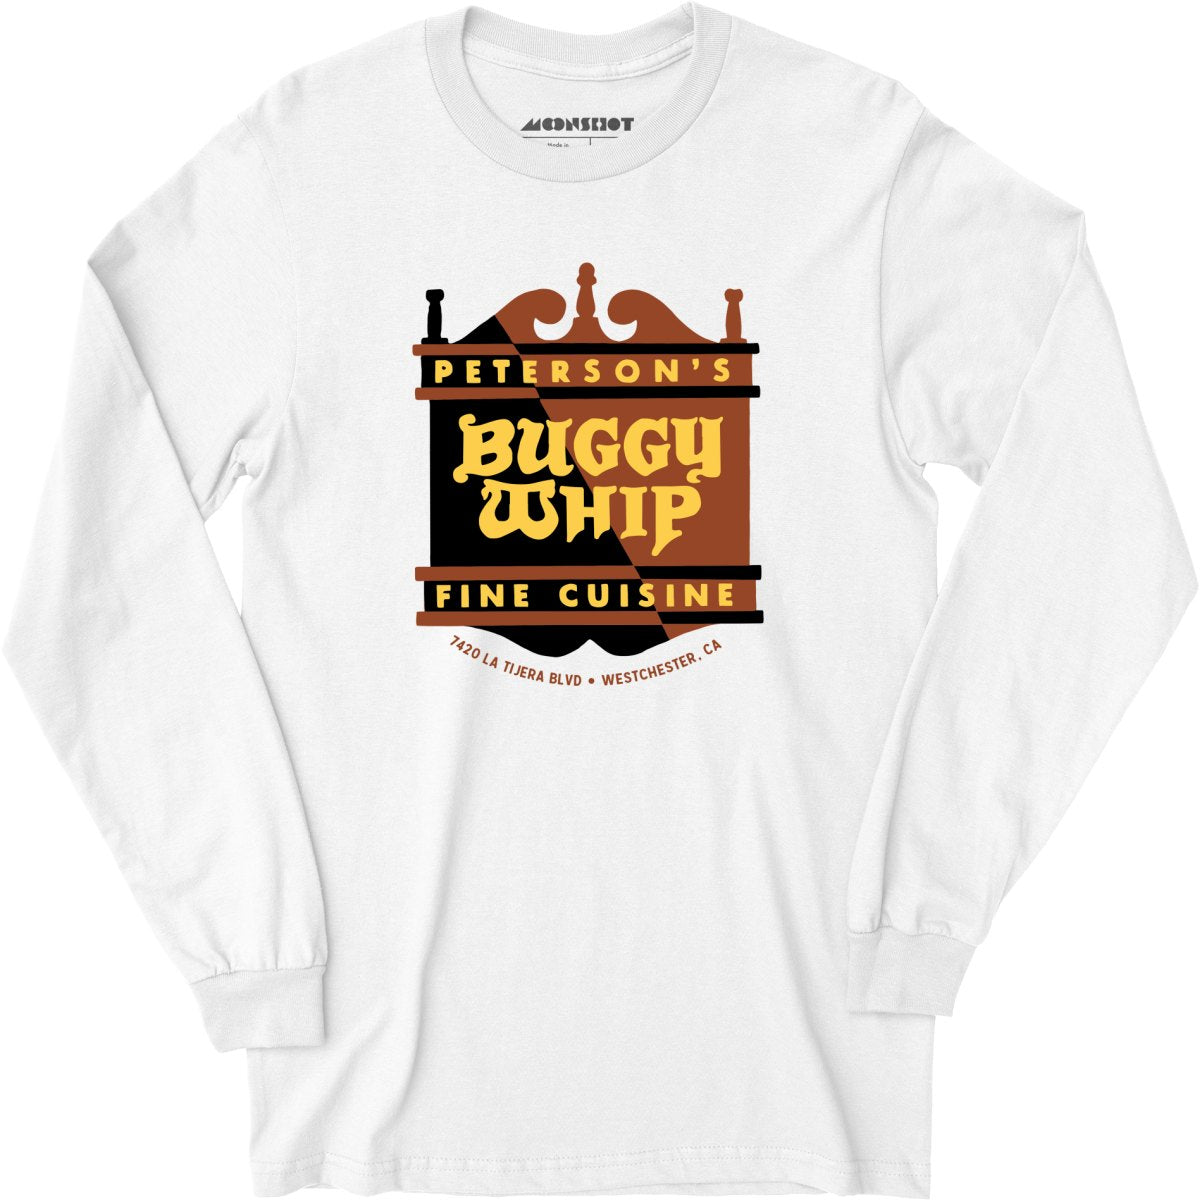 Peterson's Buggy Whip - Westchester, CA - Vintage Restaurant - Long Sleeve T-Shirt